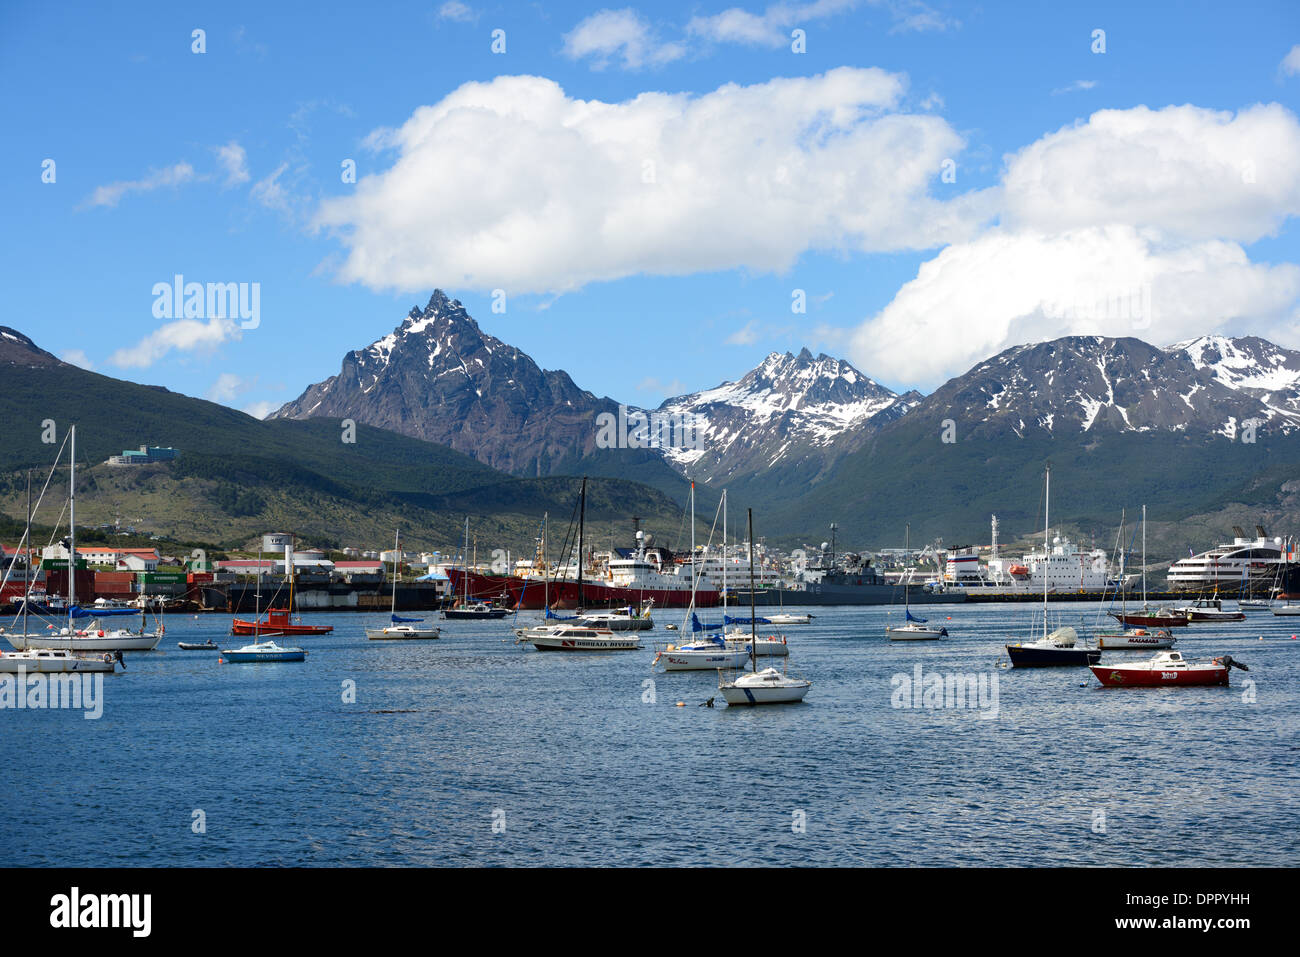 USHUAIA, Argentina - A view of Ushuaia Port from across the harbor, with the distinctive, sharp triangle-shaped Monte Olivia (Mount Olivia) in the background. Nestled at the southern tip of South America, Ushuaia is known as the southernmost city in the world. Overlooking the Beagle Channel and surrounded by the snow-capped Martial Mountains, this unique location serves as a gateway to Antarctica, attracting adventurers from all over the globe. Stock Photo